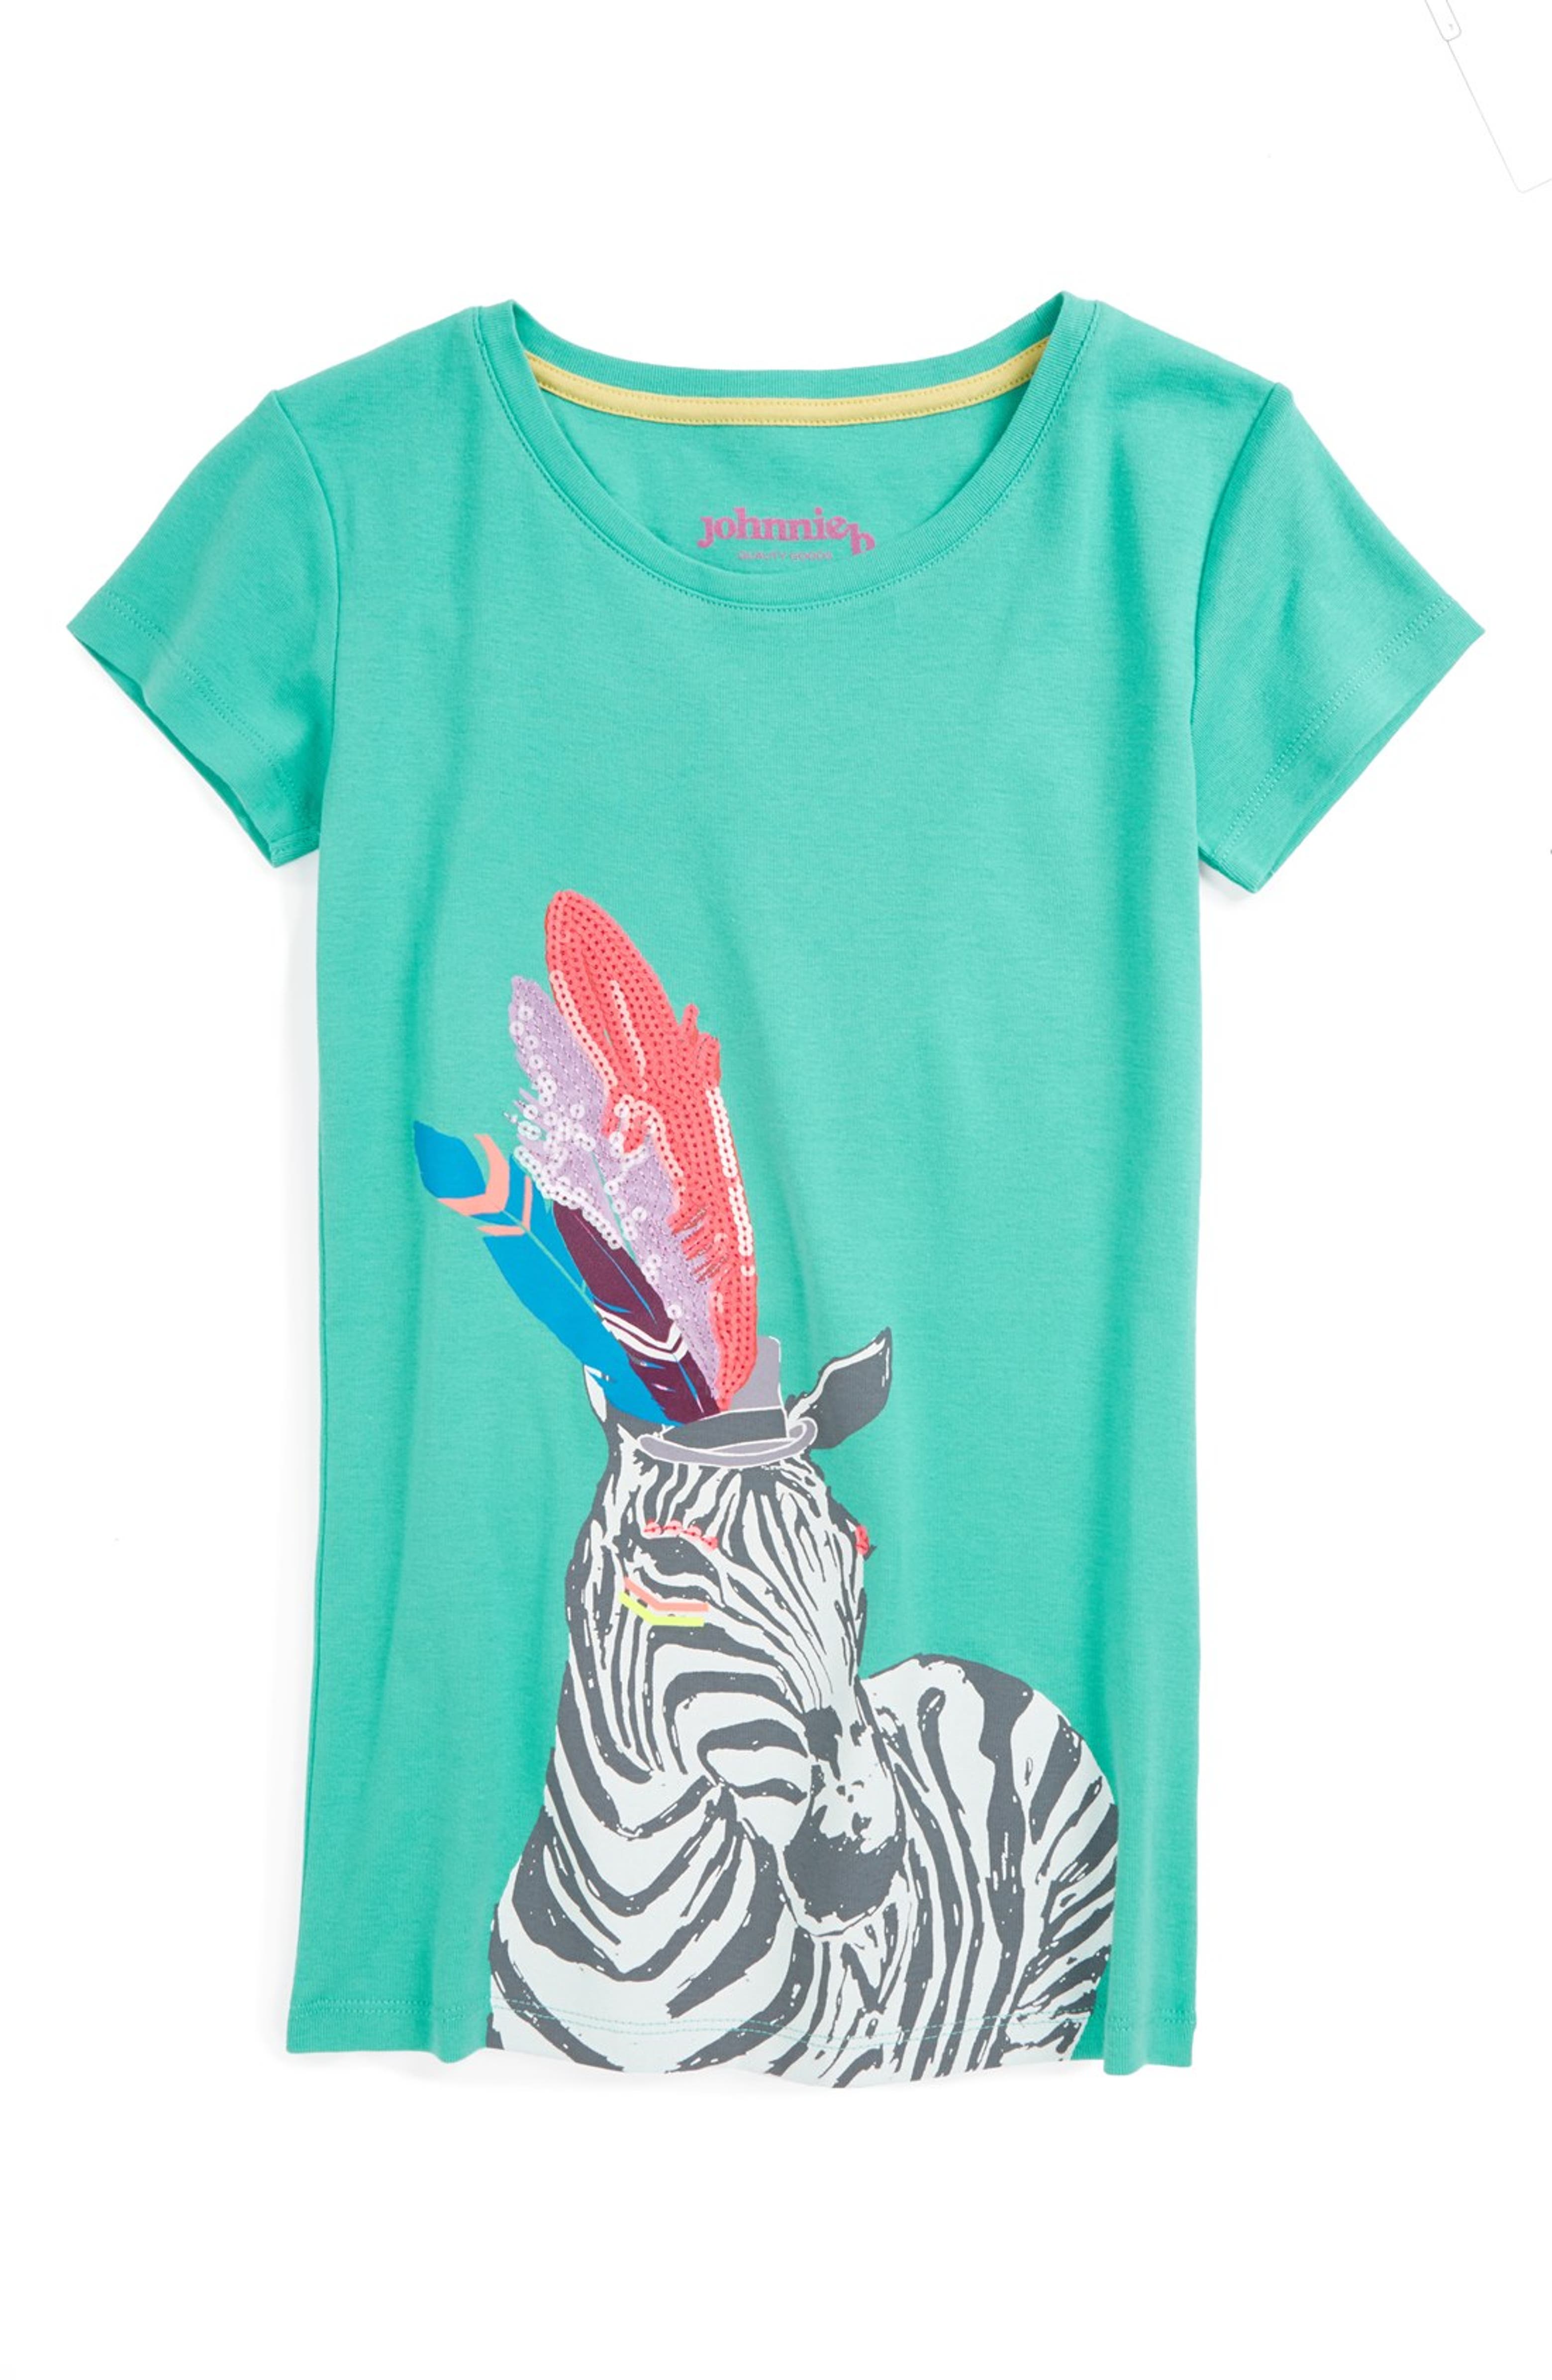 Johnnie B by Boden Embellished Graphic Tee (Big Girls) | Nordstrom